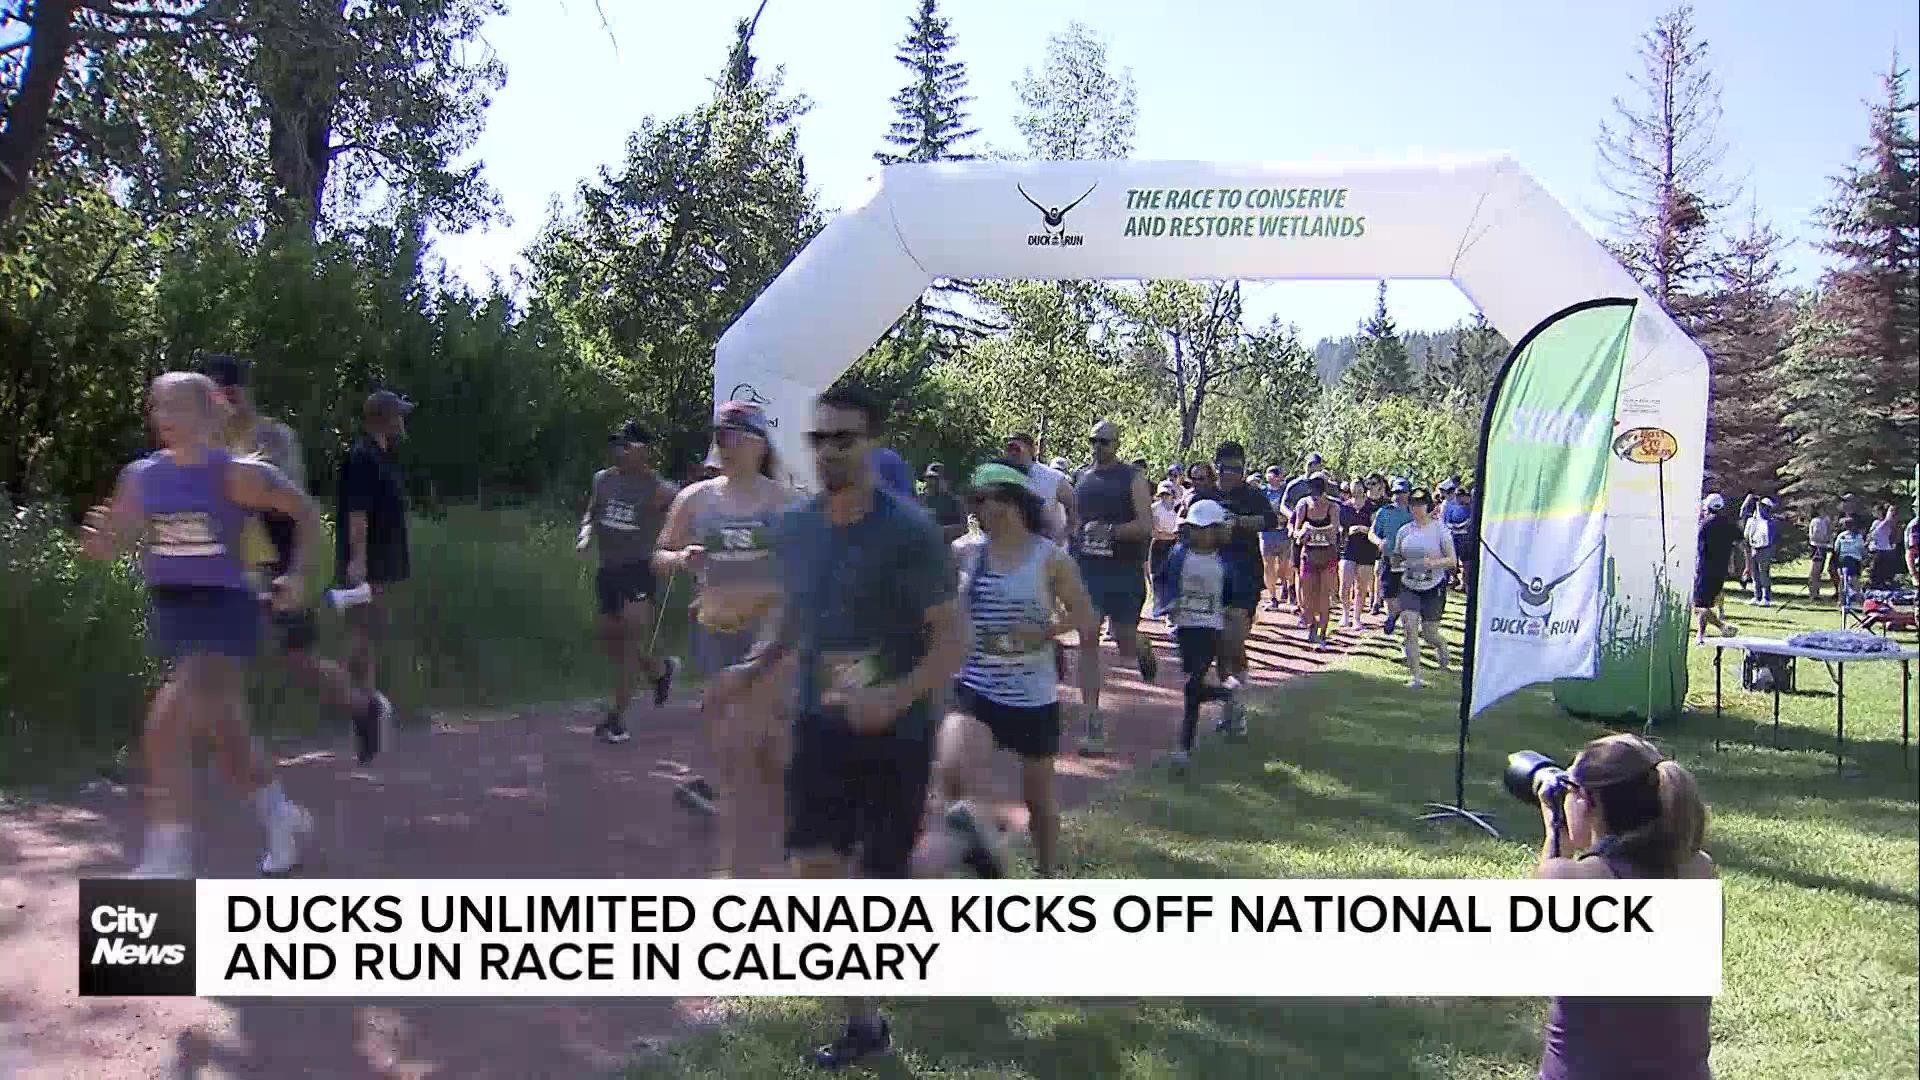 Ducks Unlimited Canada kicks off the National Duck and Run Race in Calgary